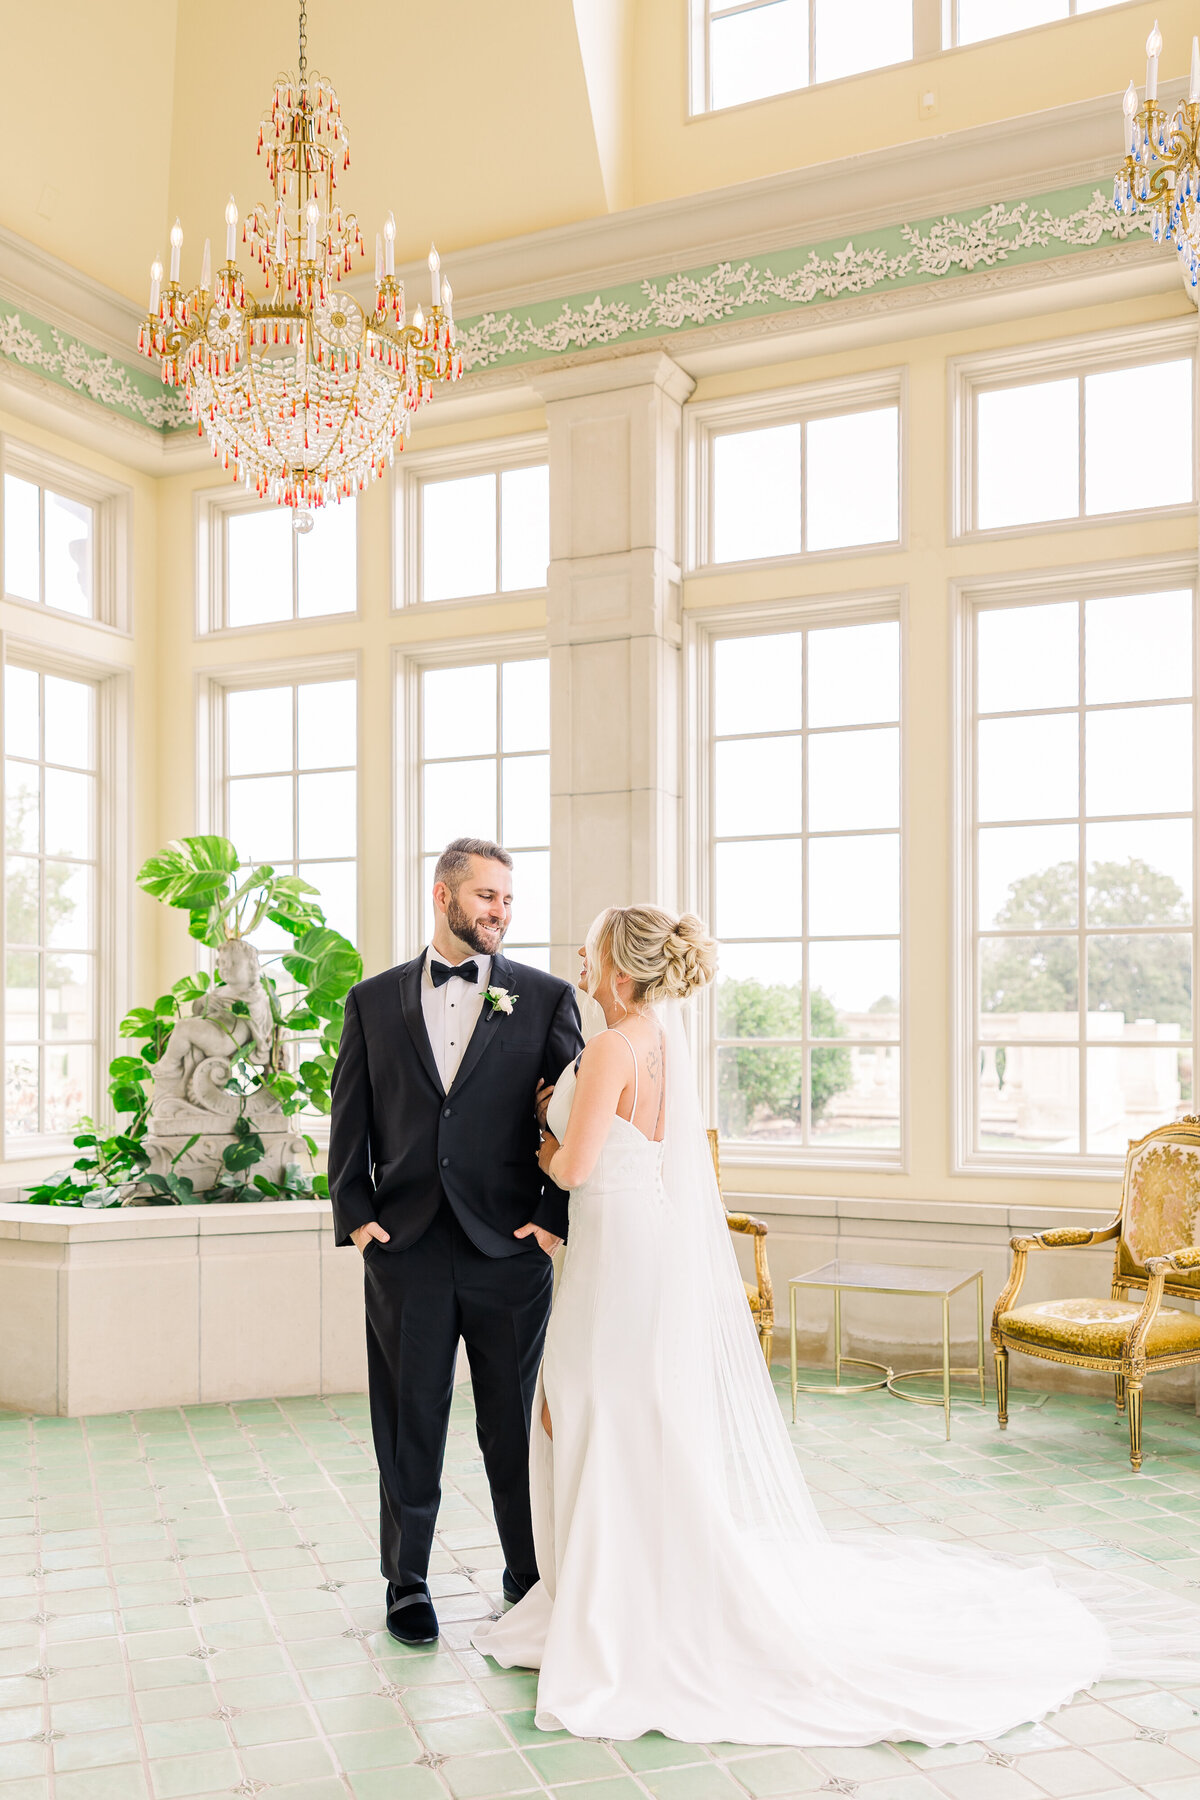 full-length-portrait-of-bride-and-groom-in-a-beauriful-room-with-chandelier-and-wall-of-windows